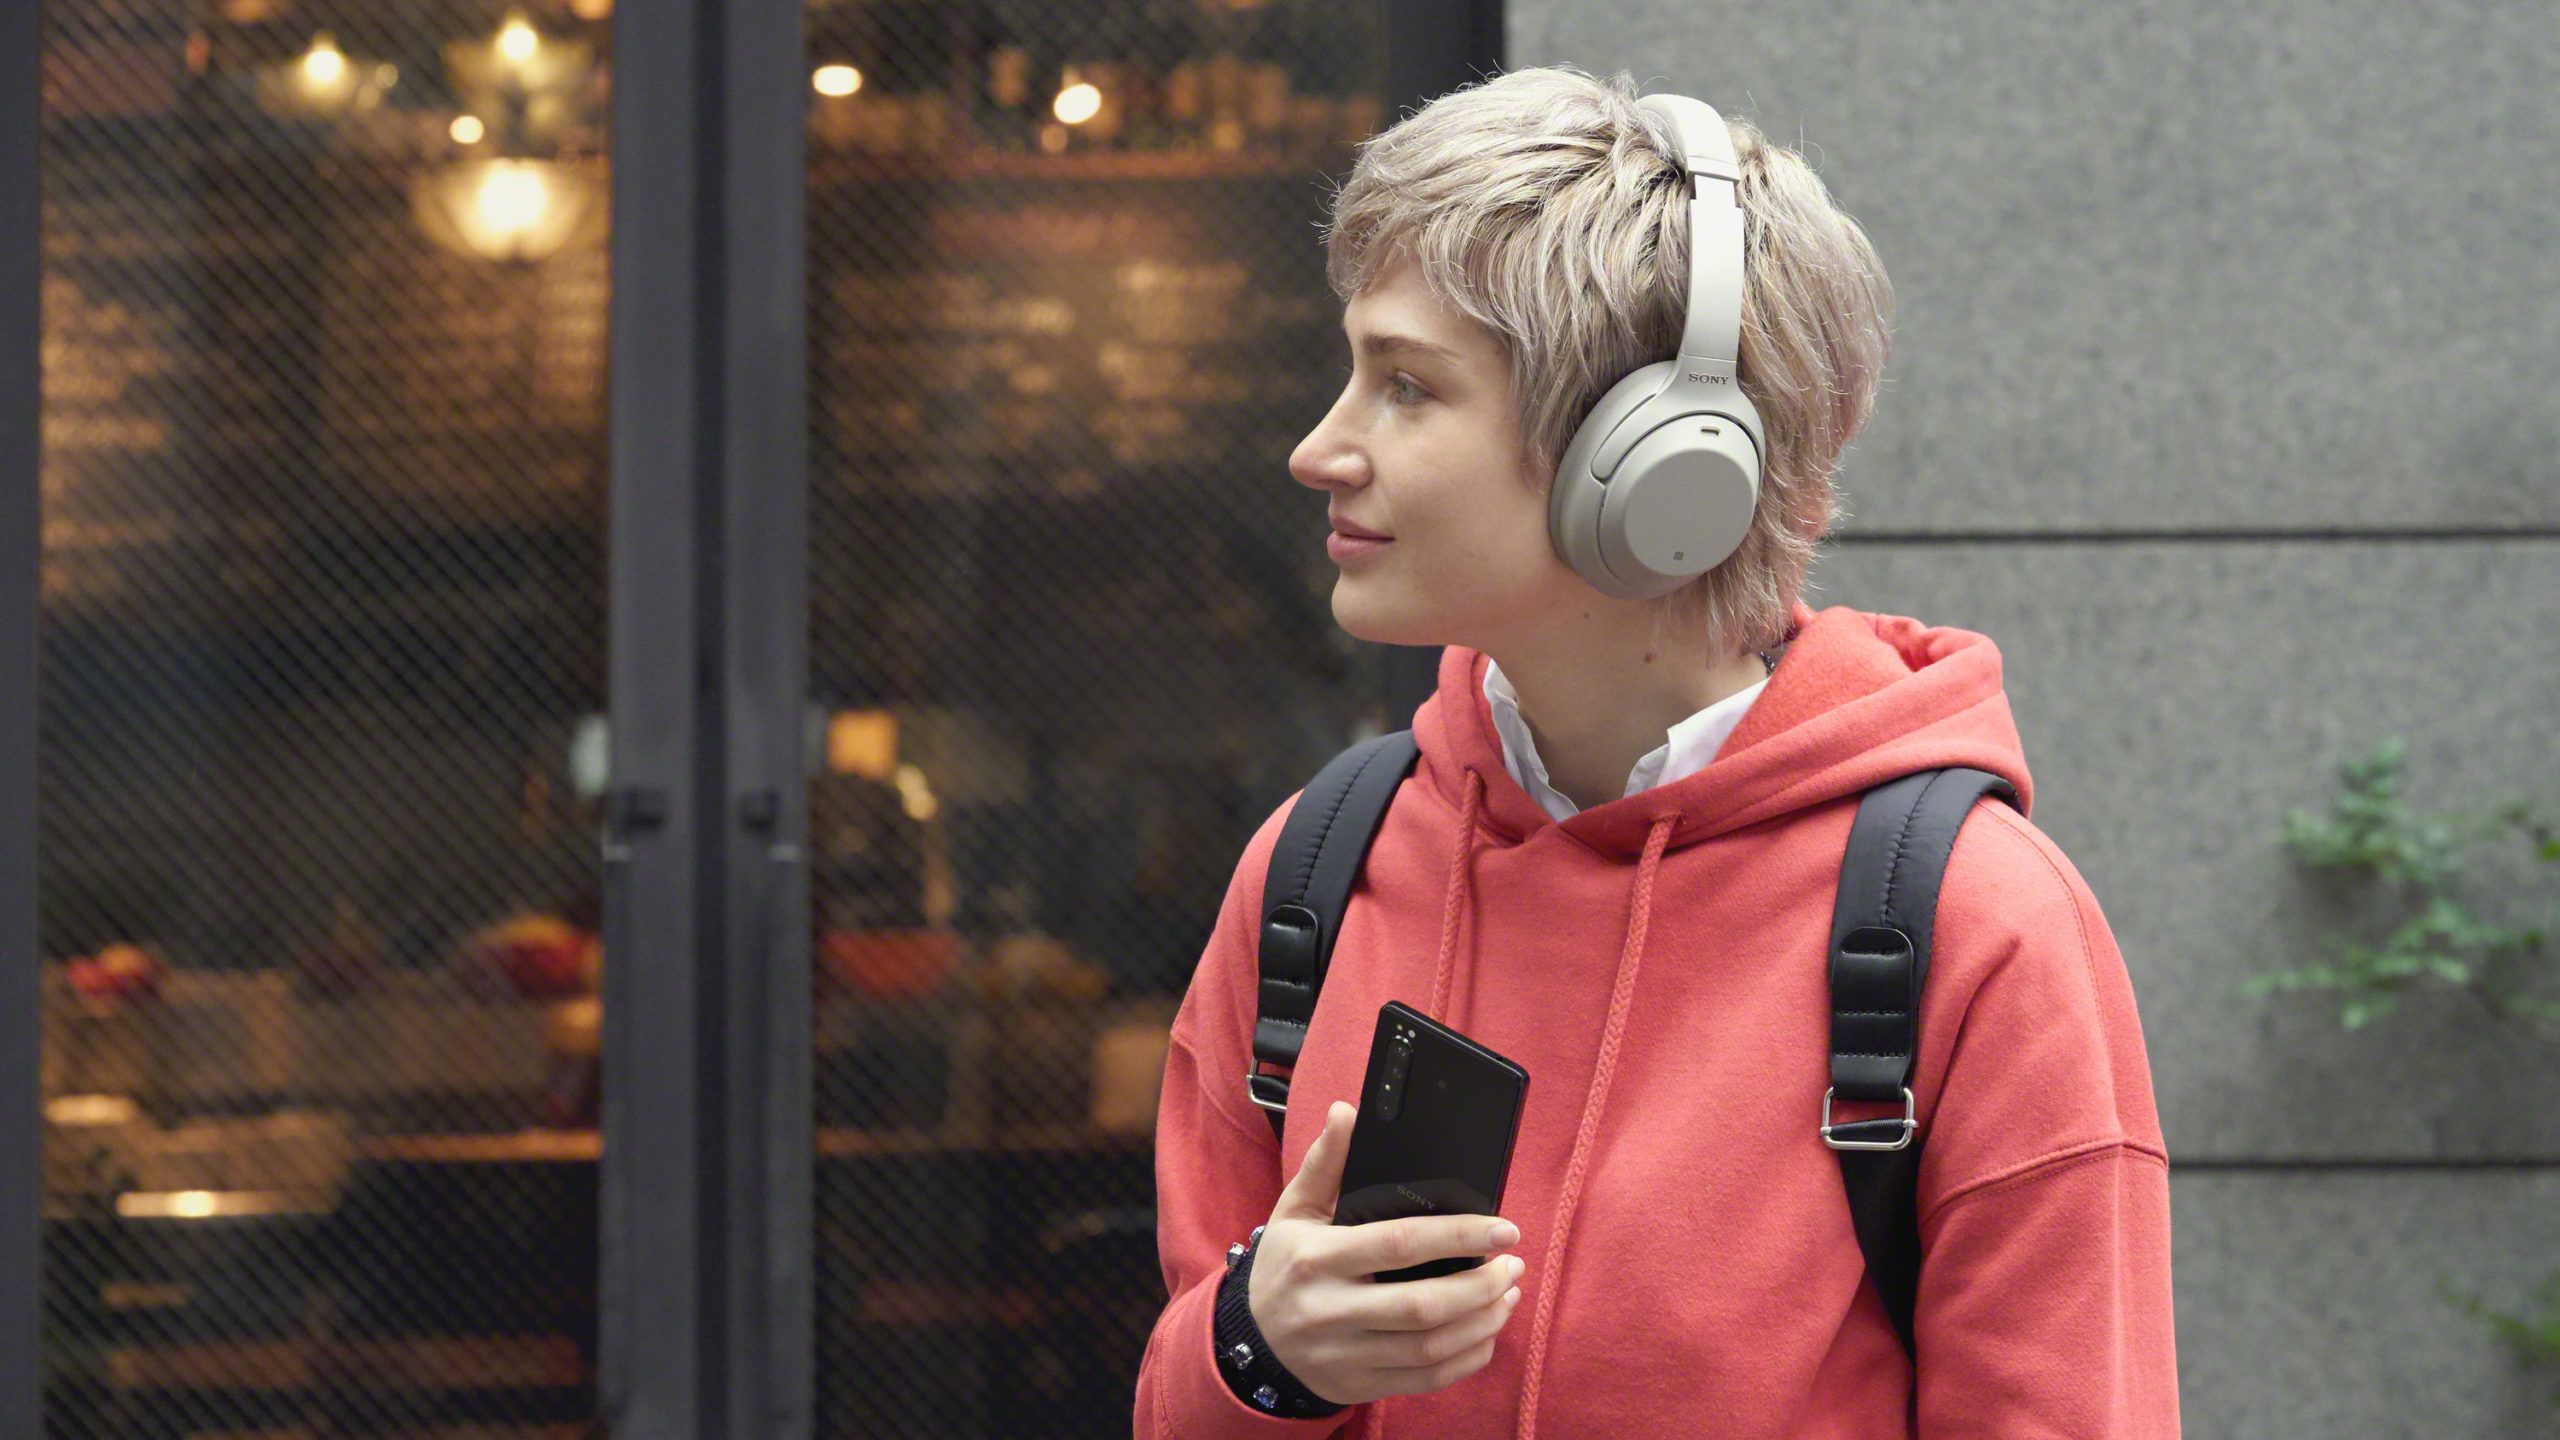 A person holding a phone and wearing wireless headphones looks into a cafe window.